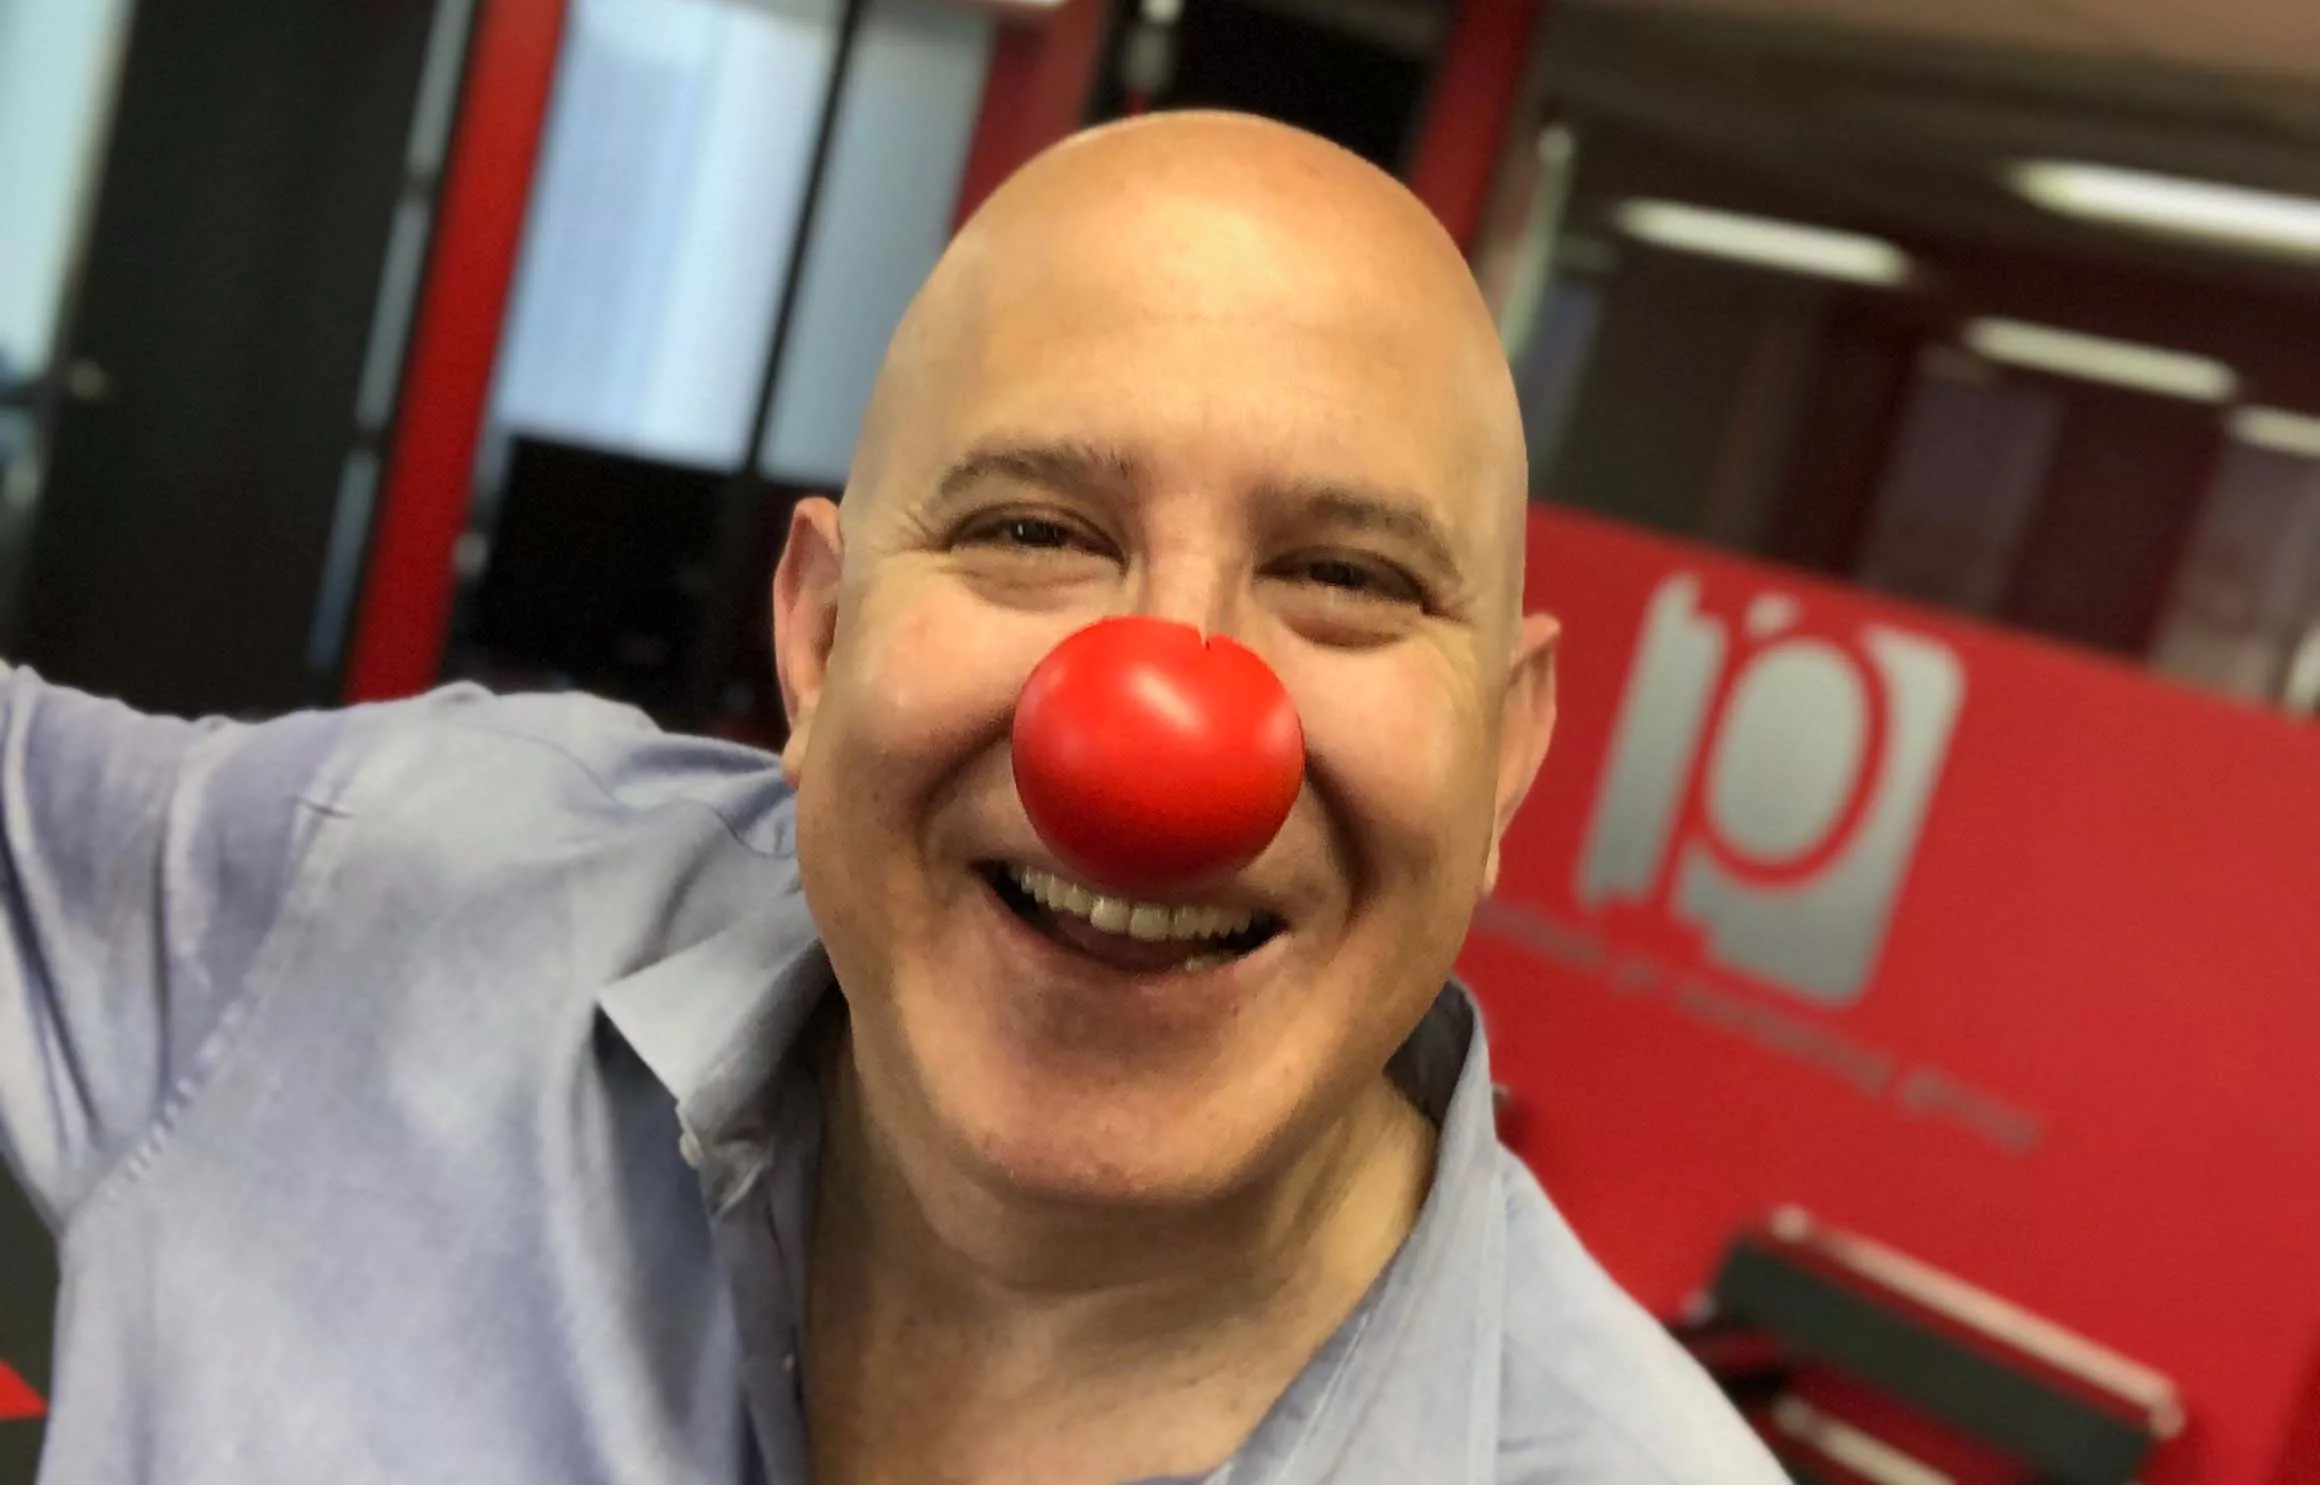 Bald man smiling with a red clown nose in an office environment